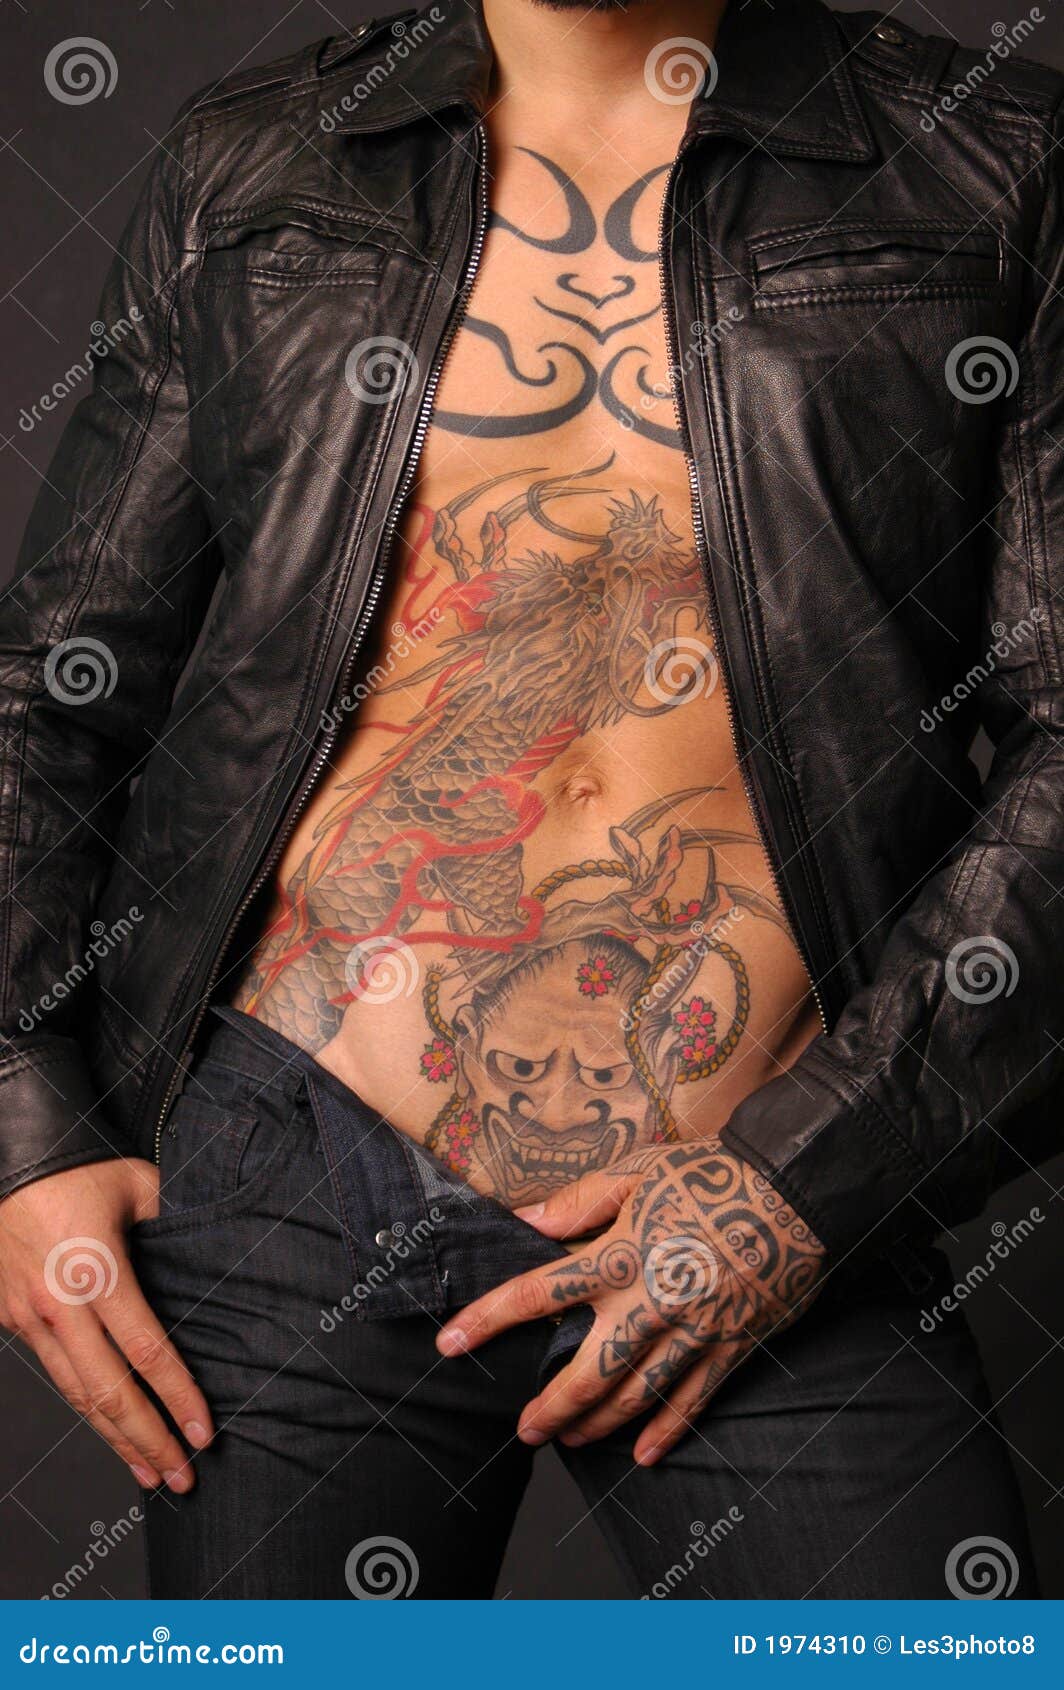 50 Spectacular Stomach Tattoos  Tattoo Ideas Artists and Models